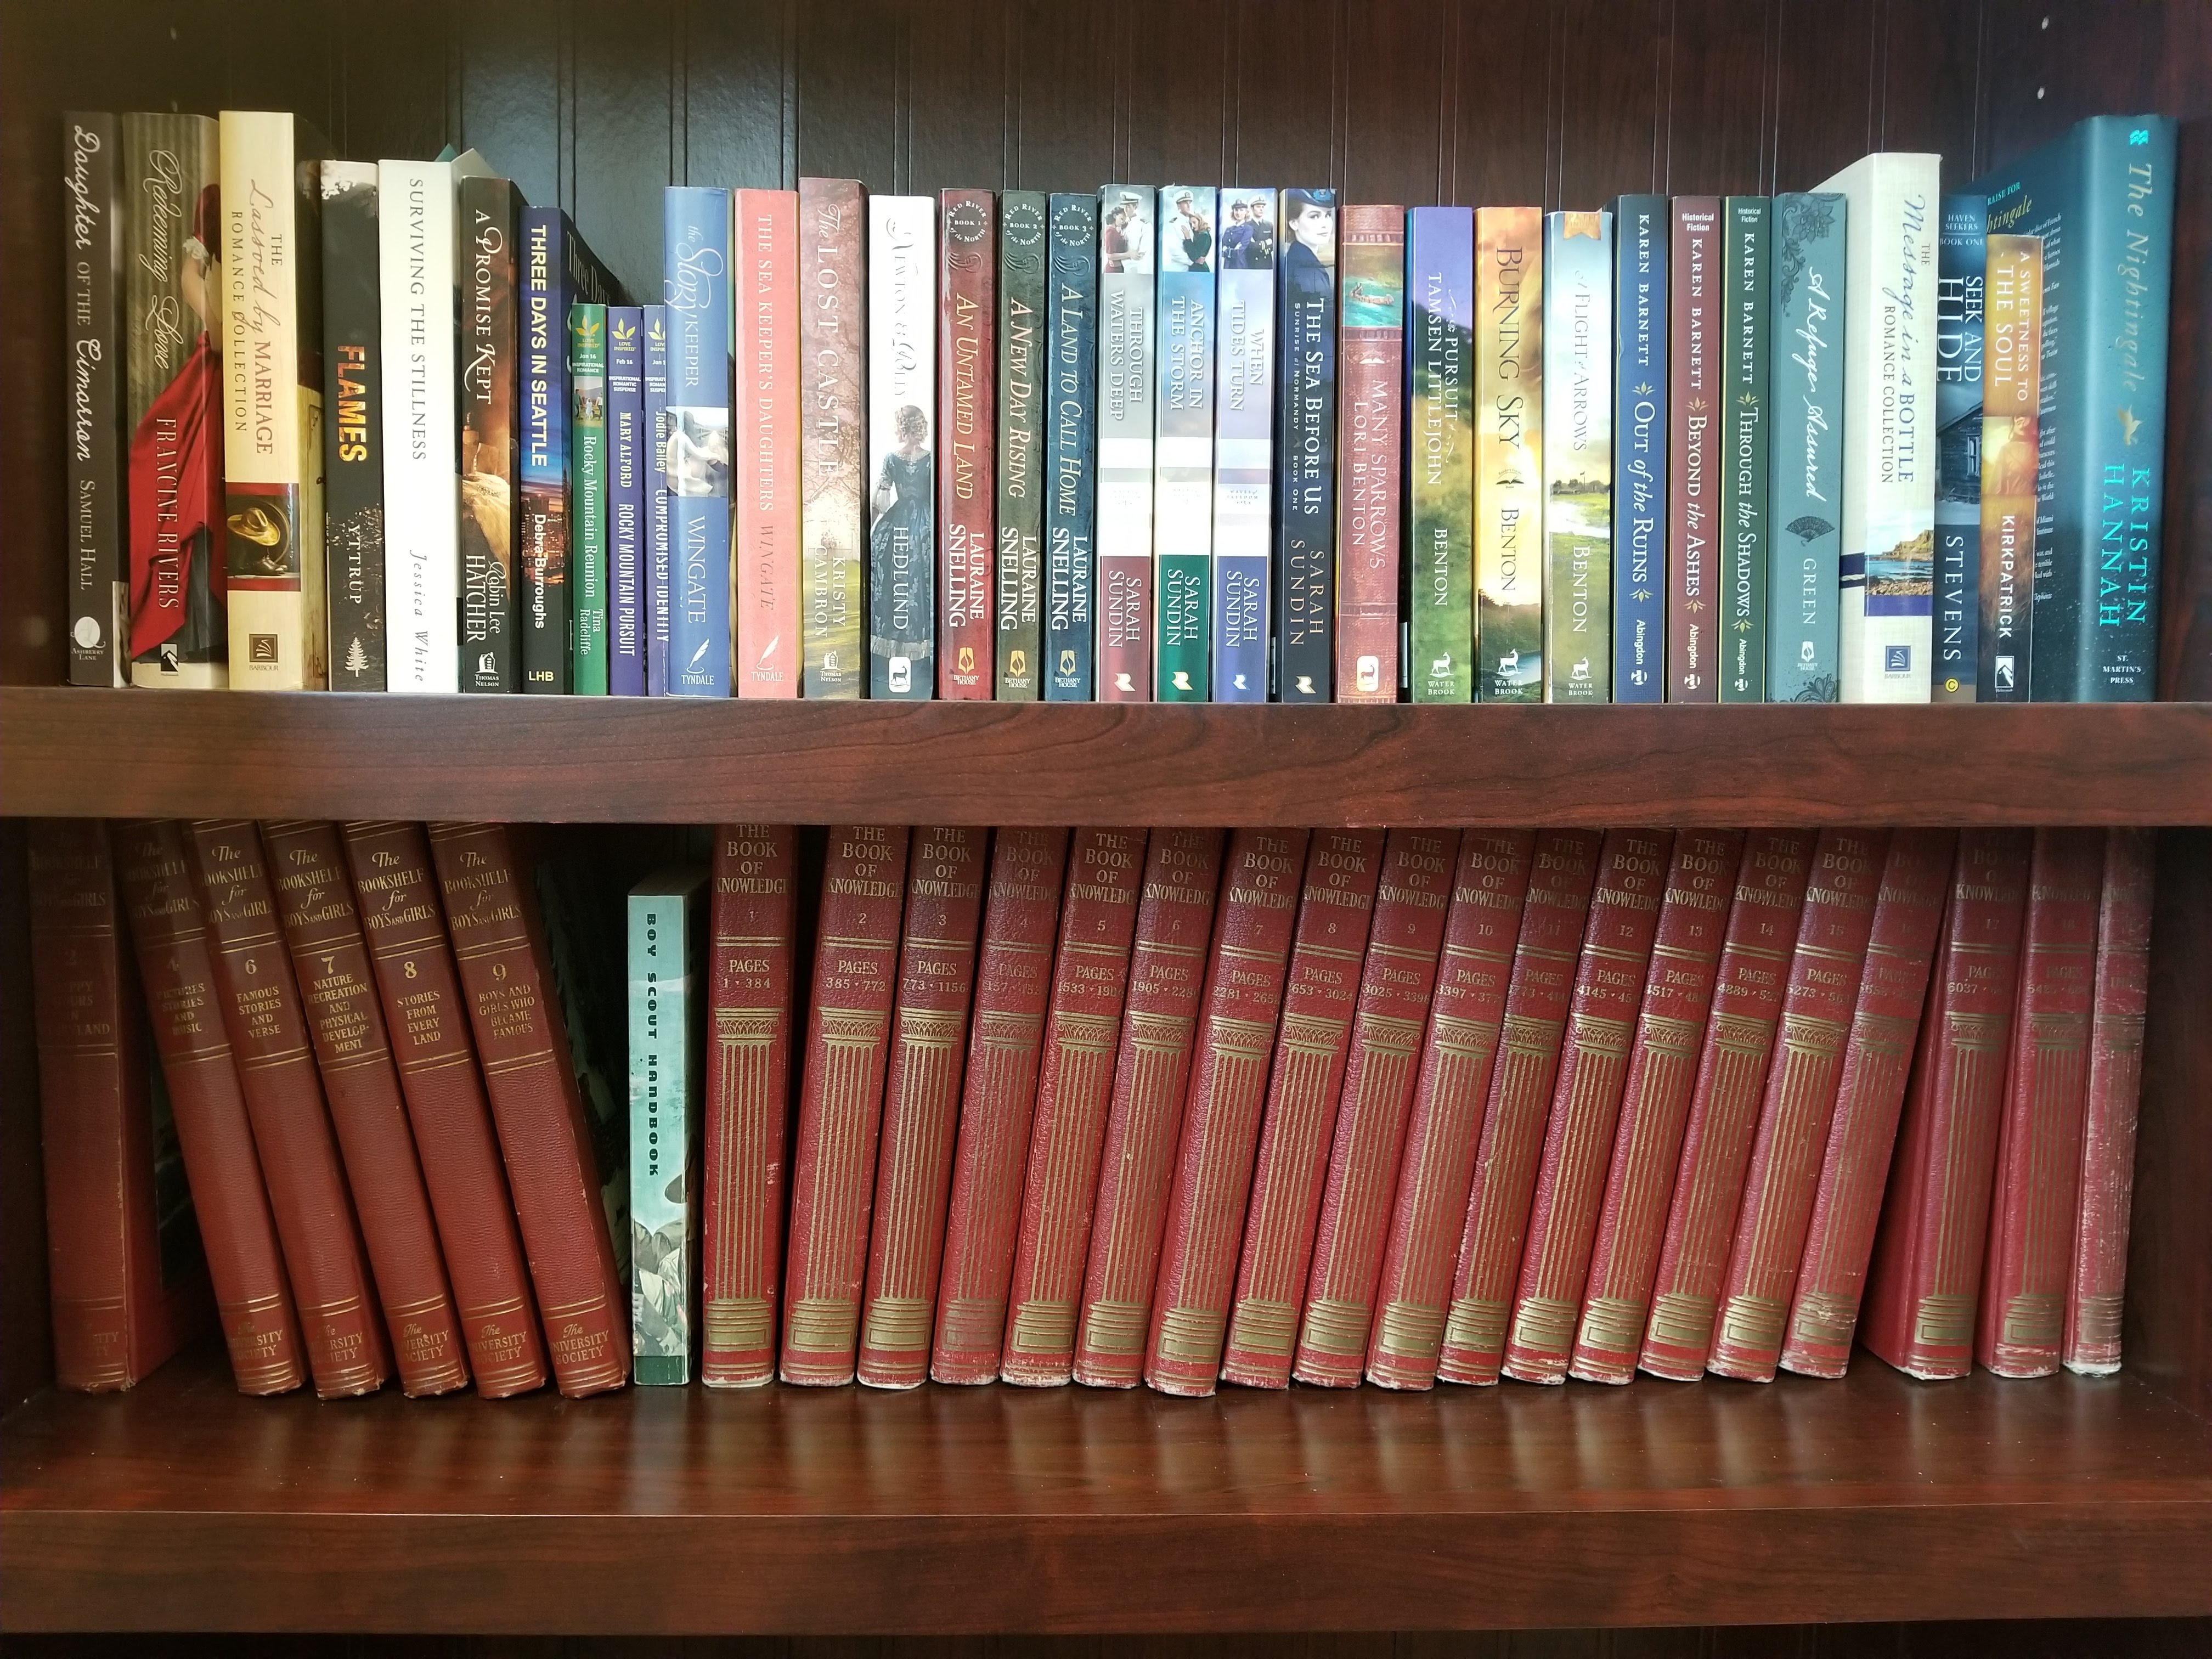 Bookshelf collection - Author Roanne King